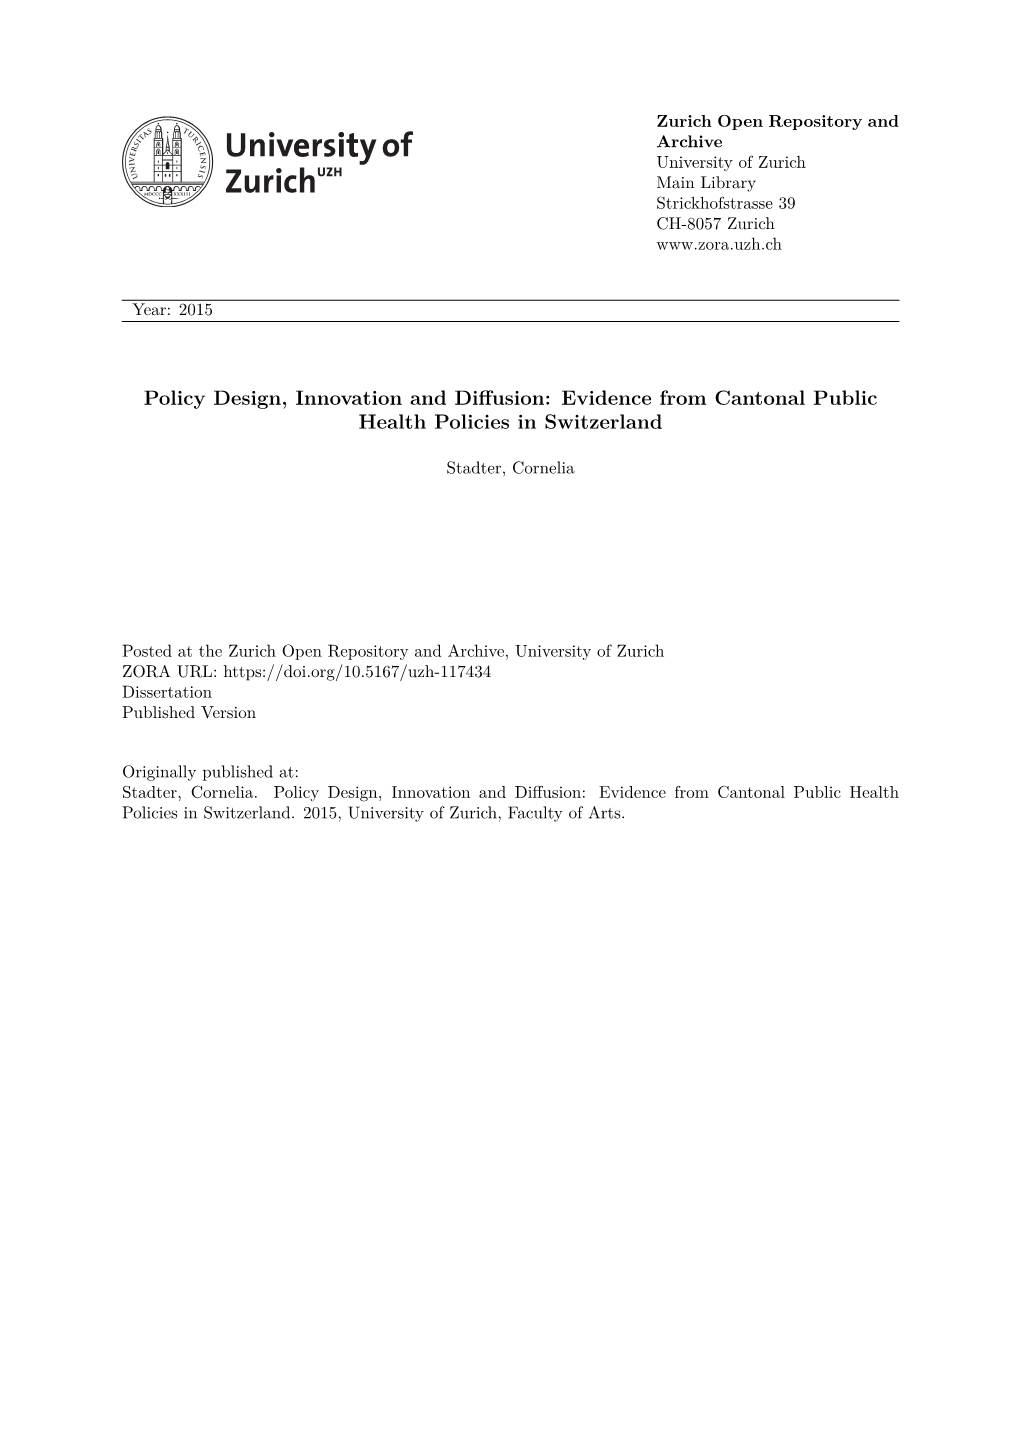 Policy Design, Innovation and Diffusion: Evidence from Cantonal Public Health Policies in Switzerland